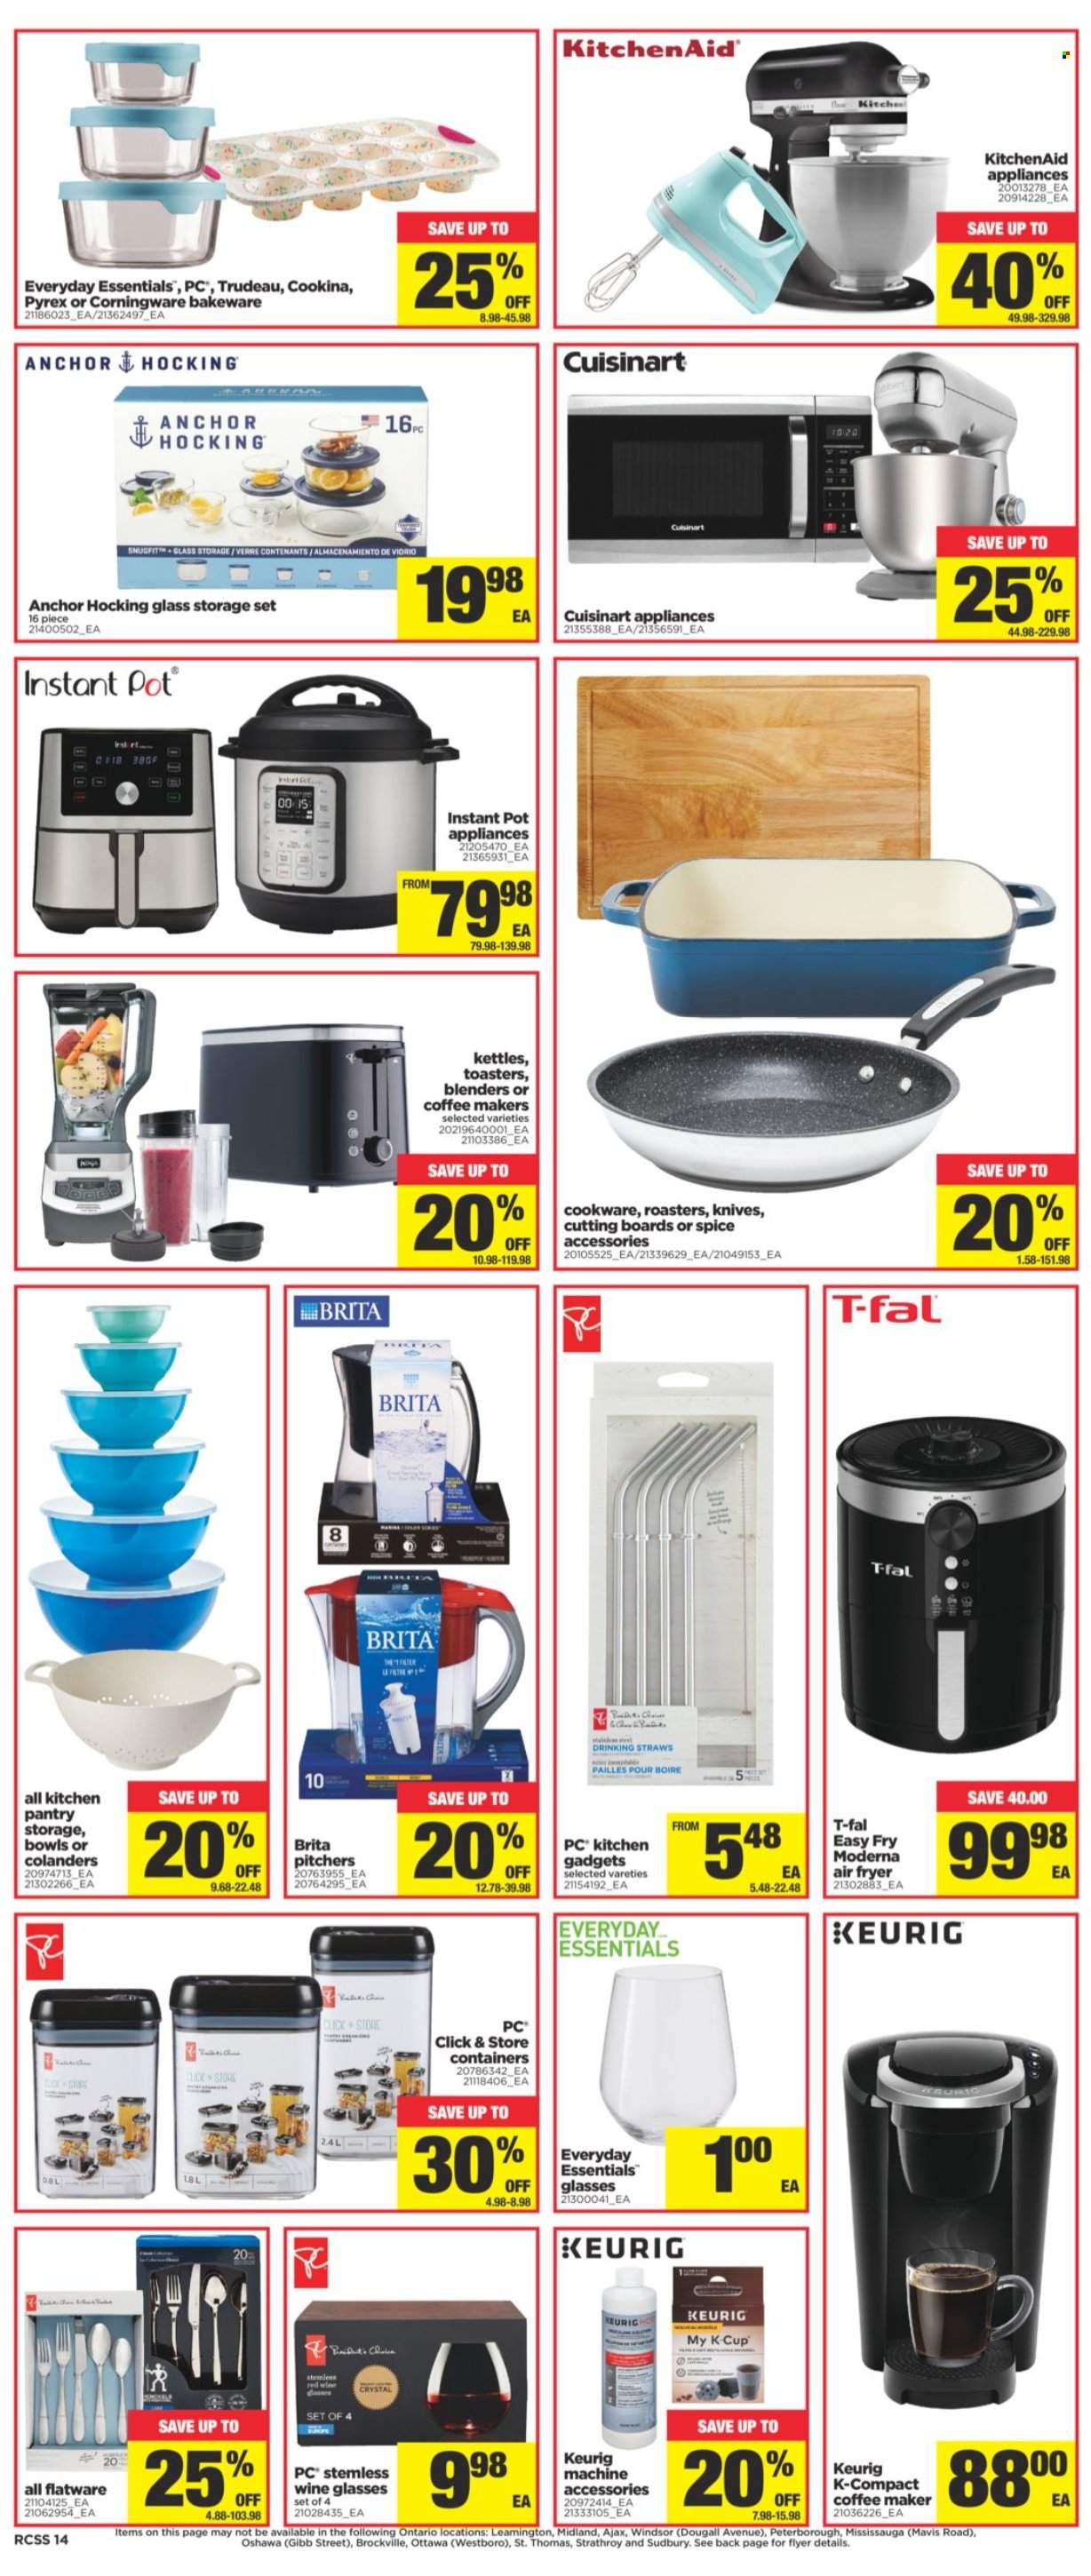 thumbnail - Real Canadian Superstore Flyer - September 30, 2021 - October 06, 2021 - Sales products - Anchor, spice, Keurig, red wine, wine, Ajax, cookware set, flatware, KitchenAid, knife, wine glass, pot, straw, bakeware, Cuisinart, Pyrex, storage container set, coffee machine, air fryer, Instant Pot. Page 14.